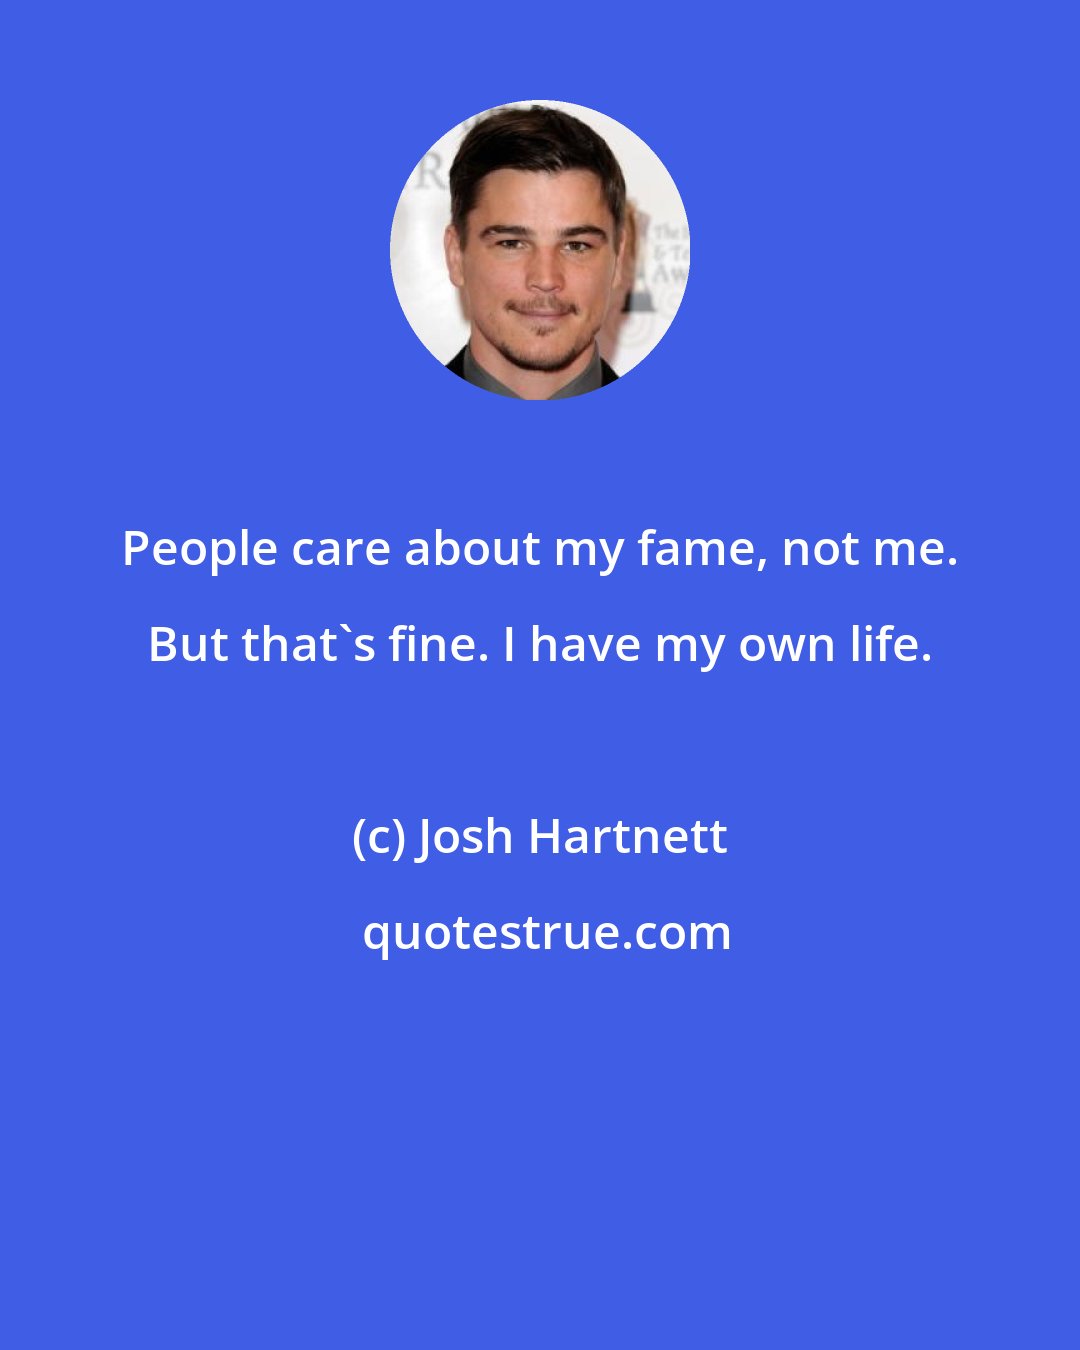 Josh Hartnett: People care about my fame, not me. But that's fine. I have my own life.